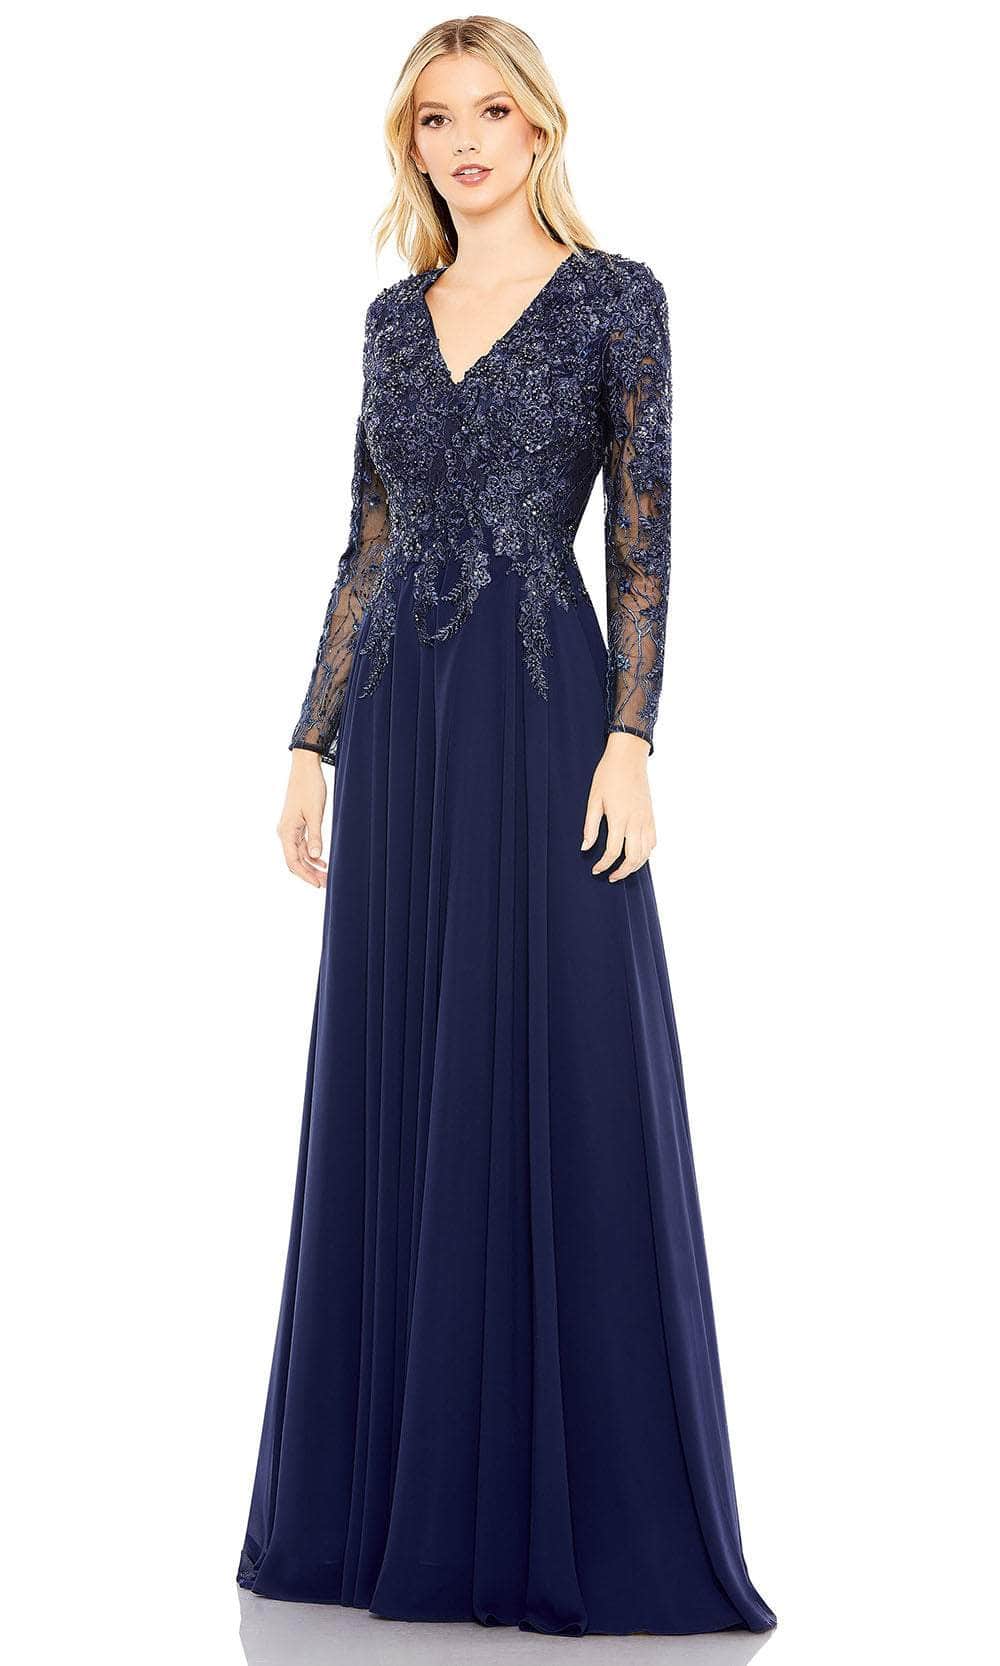 Image of Mac Duggal 20388 - Embroidered Long Sleeve Formal Dress